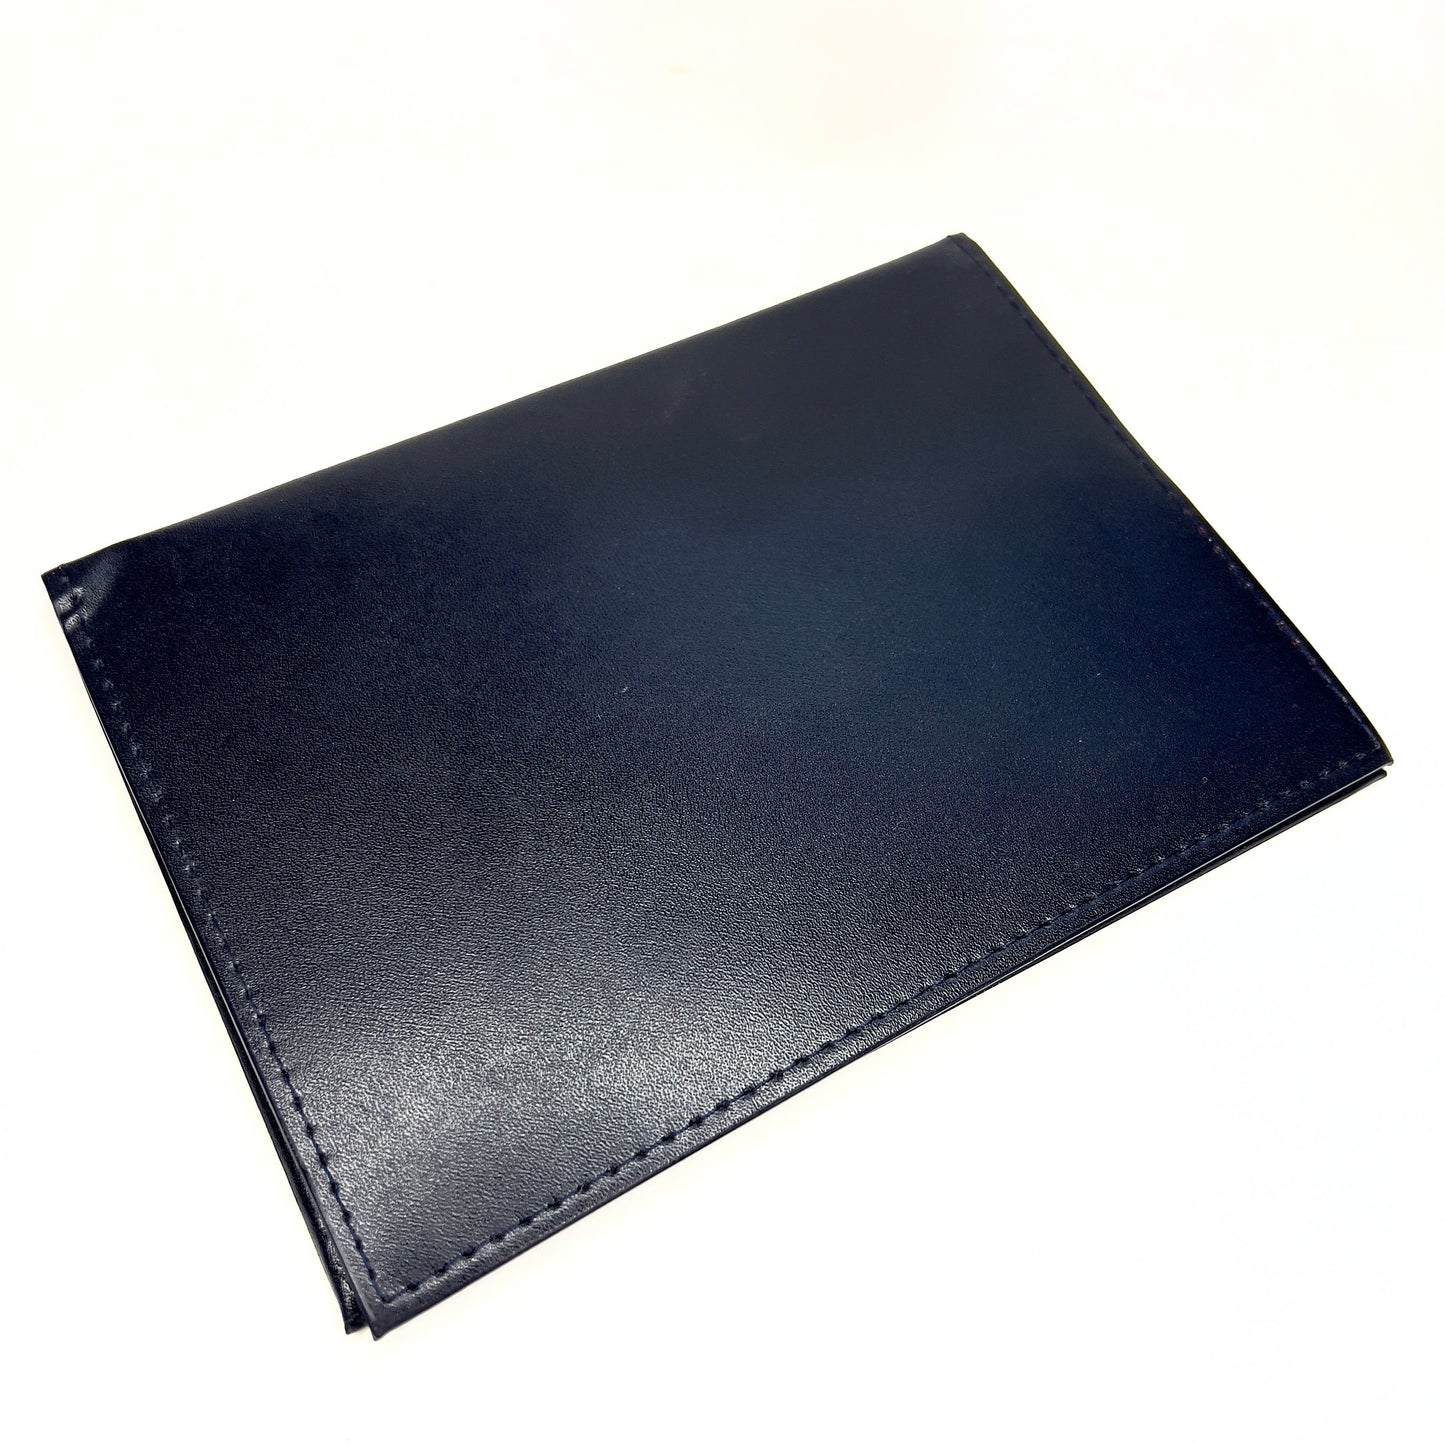 CHOPARD Blue Faux Leather Documents Folder 6.75x5 inches + Certificate